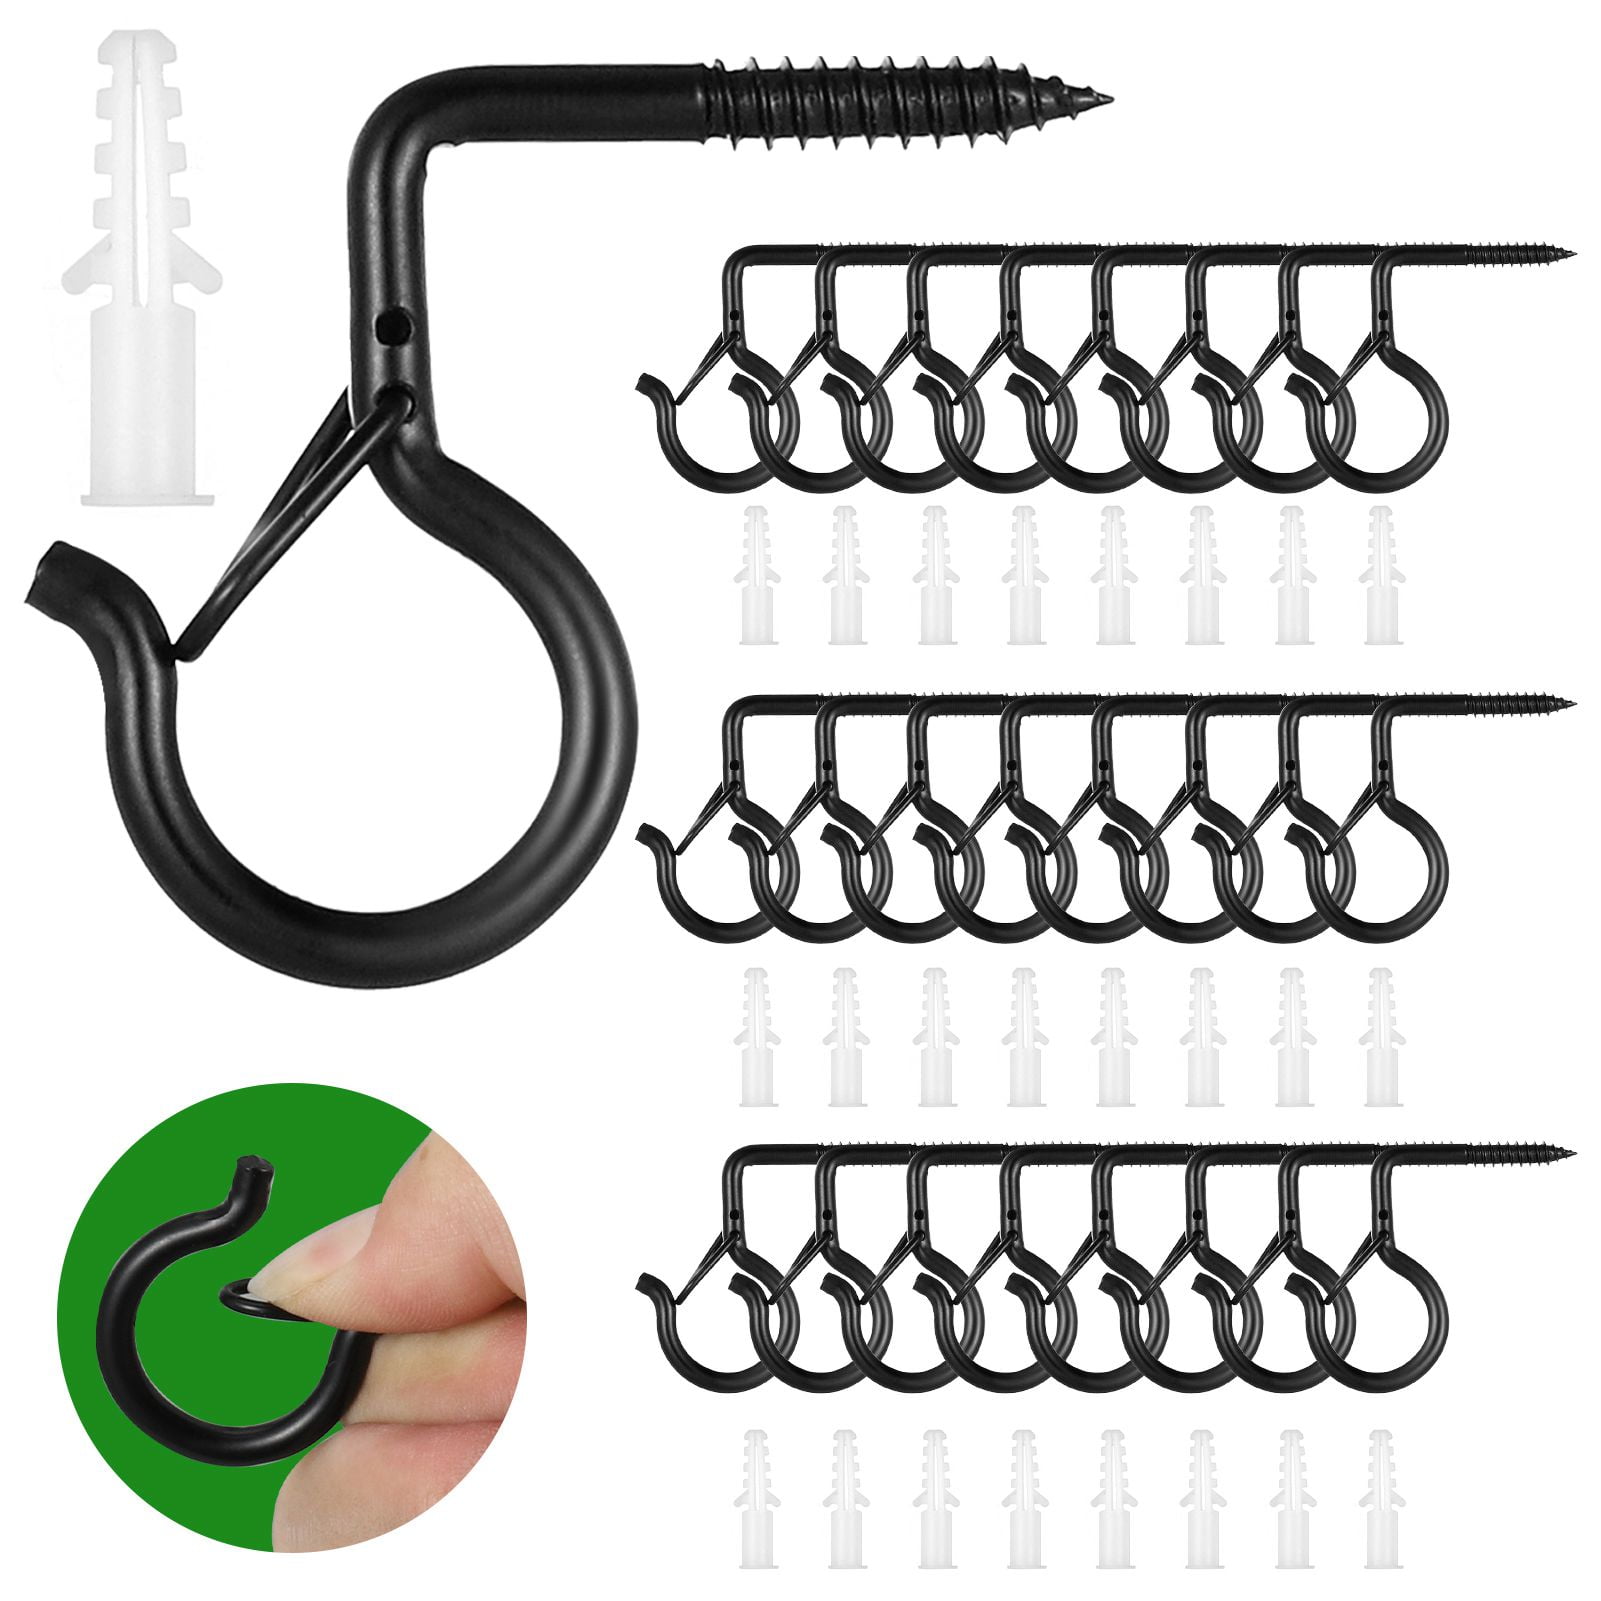 LUIISIS 24 PCS Q-Hanger Hooks with Safety Buckle, Patio Light